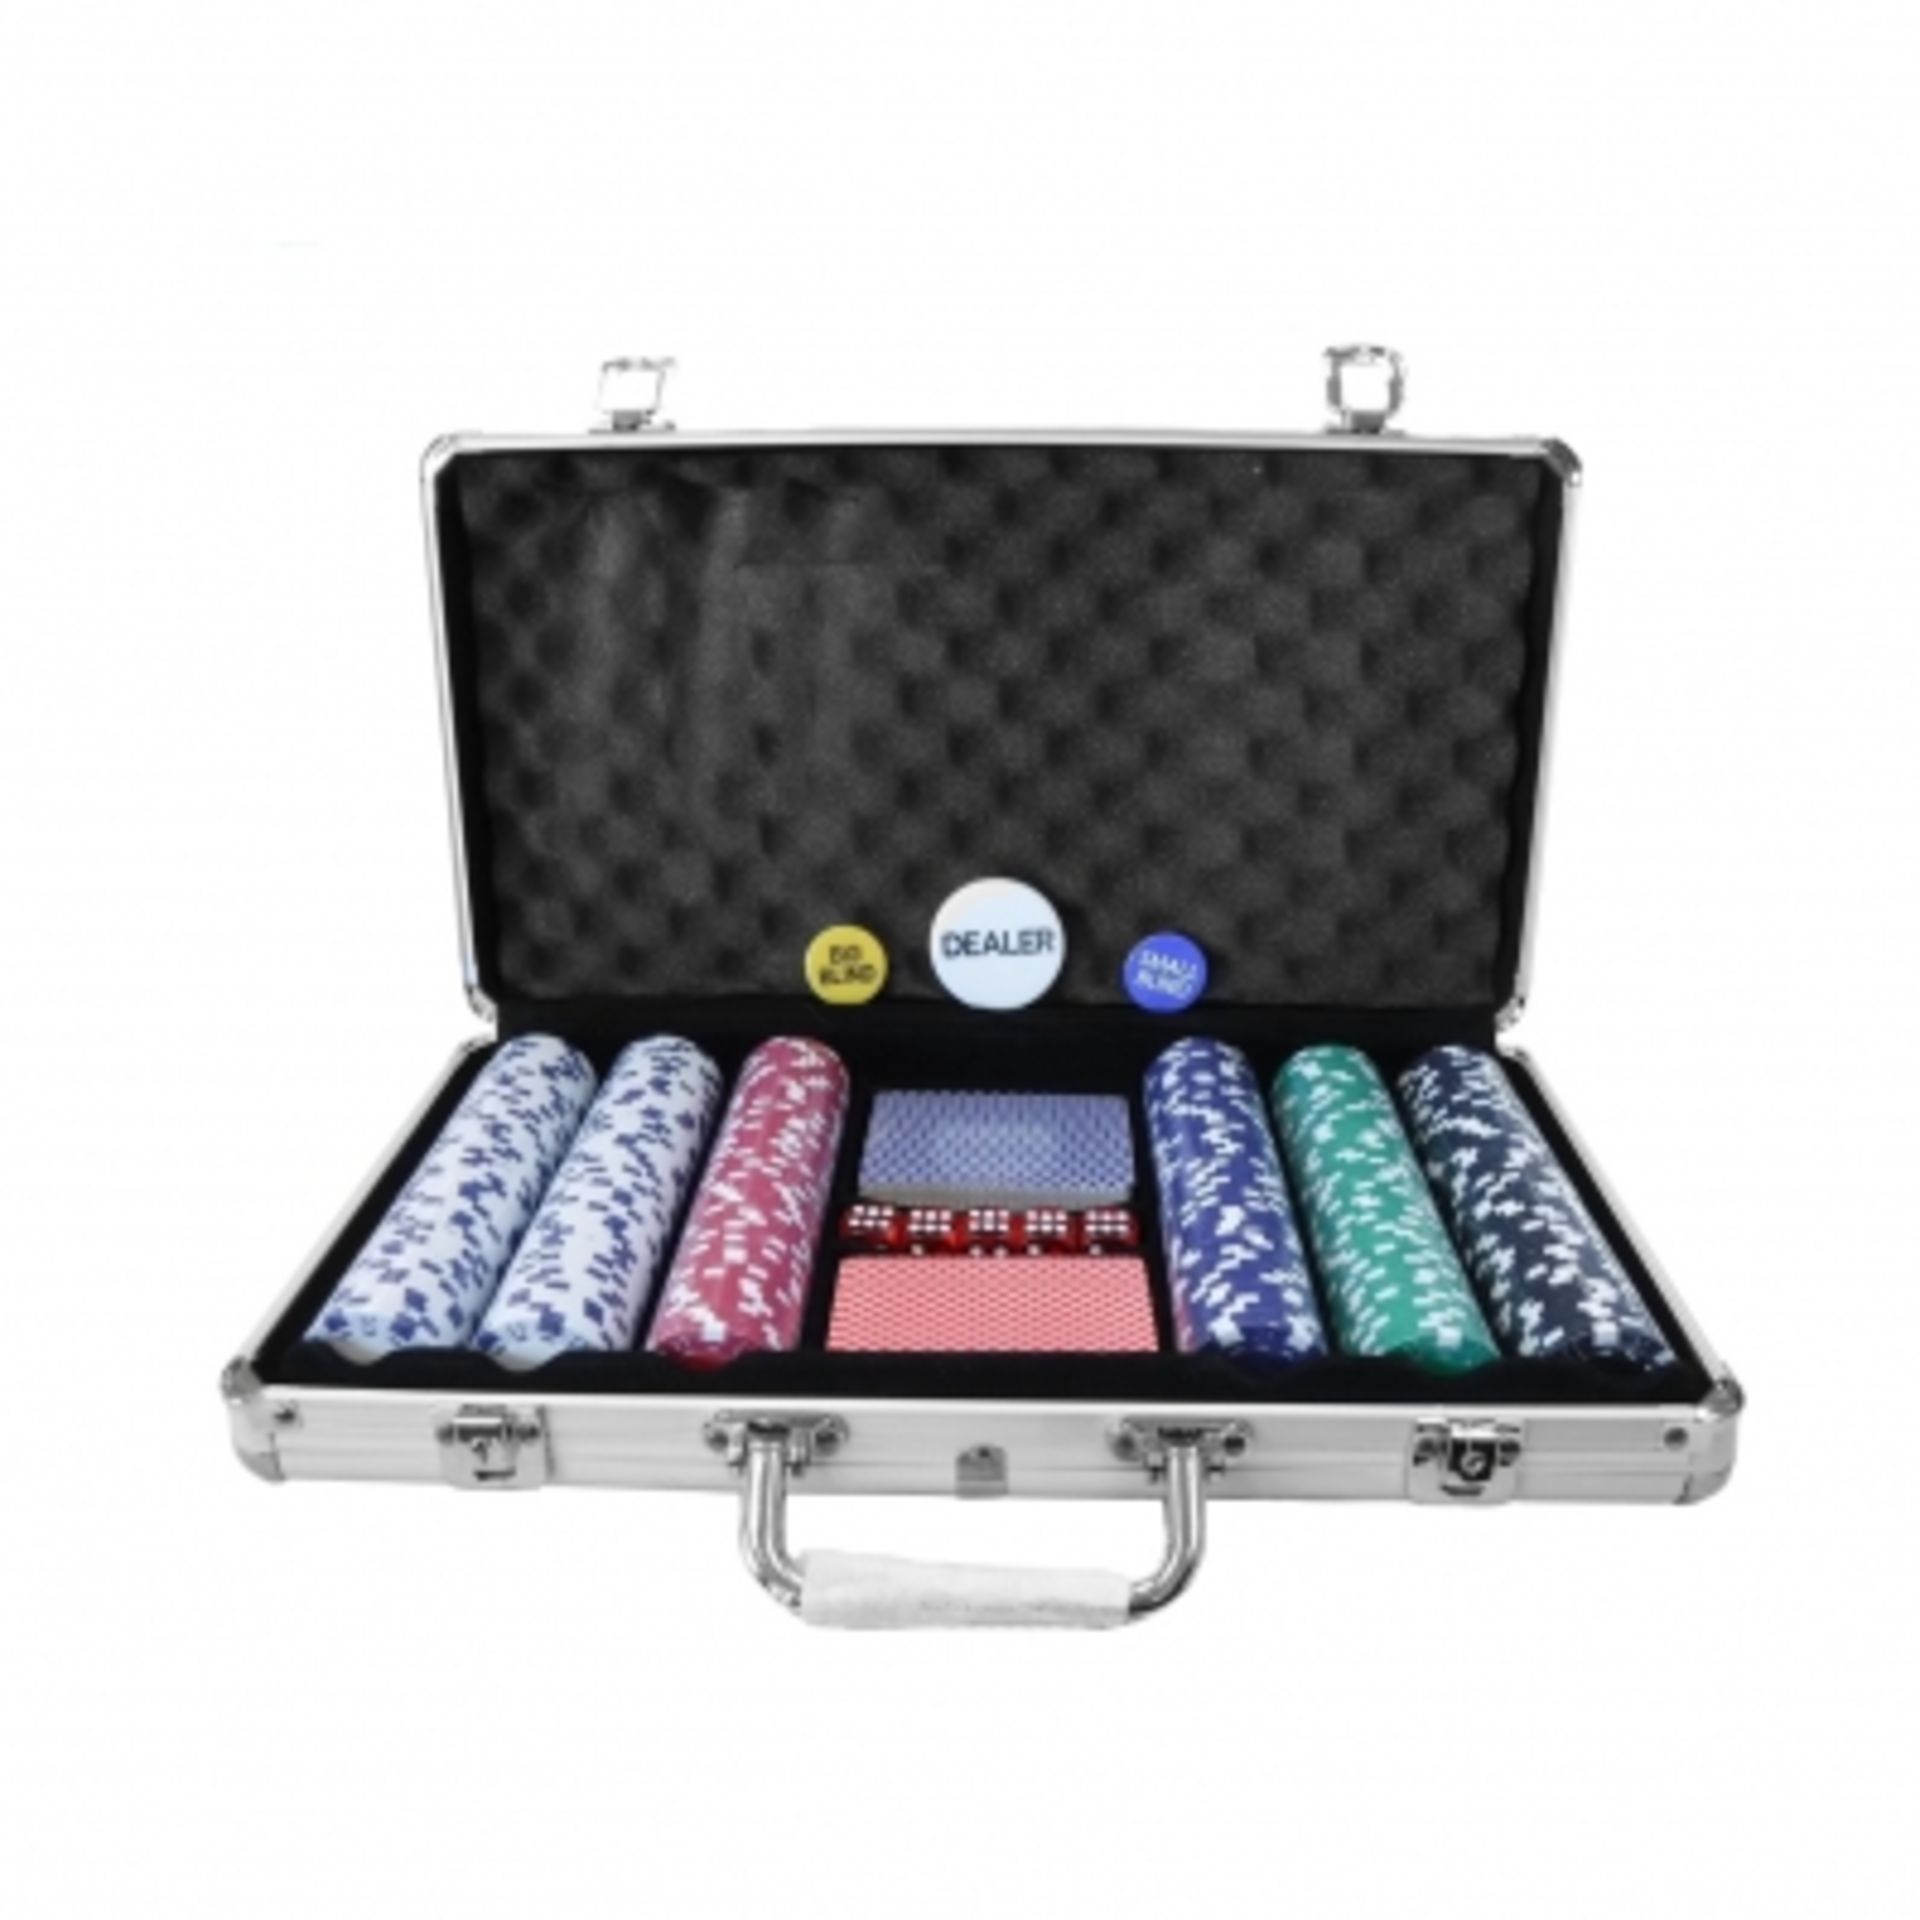 (RU323) Poker Set - 300 Piece Complete With Chips, Cards, Dice, And Casino Style Case ...